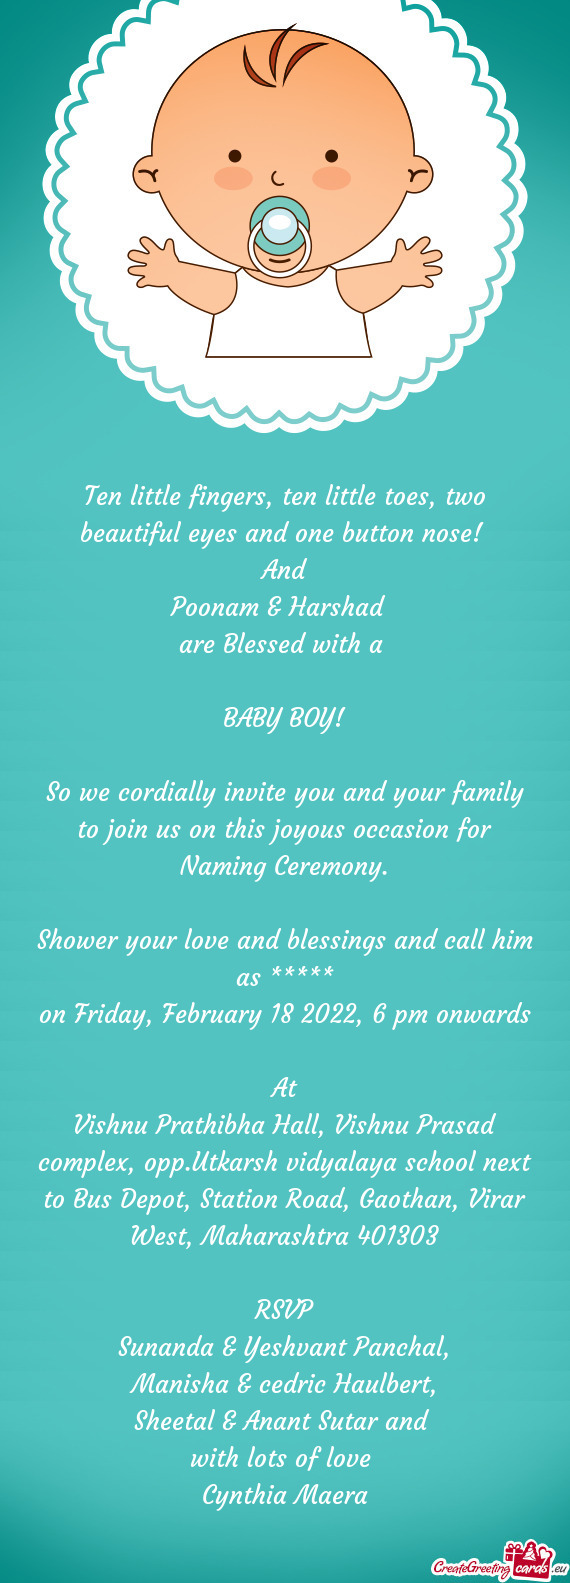 So we cordially invite you and your family to join us on this joyous occasion for Naming Ceremony